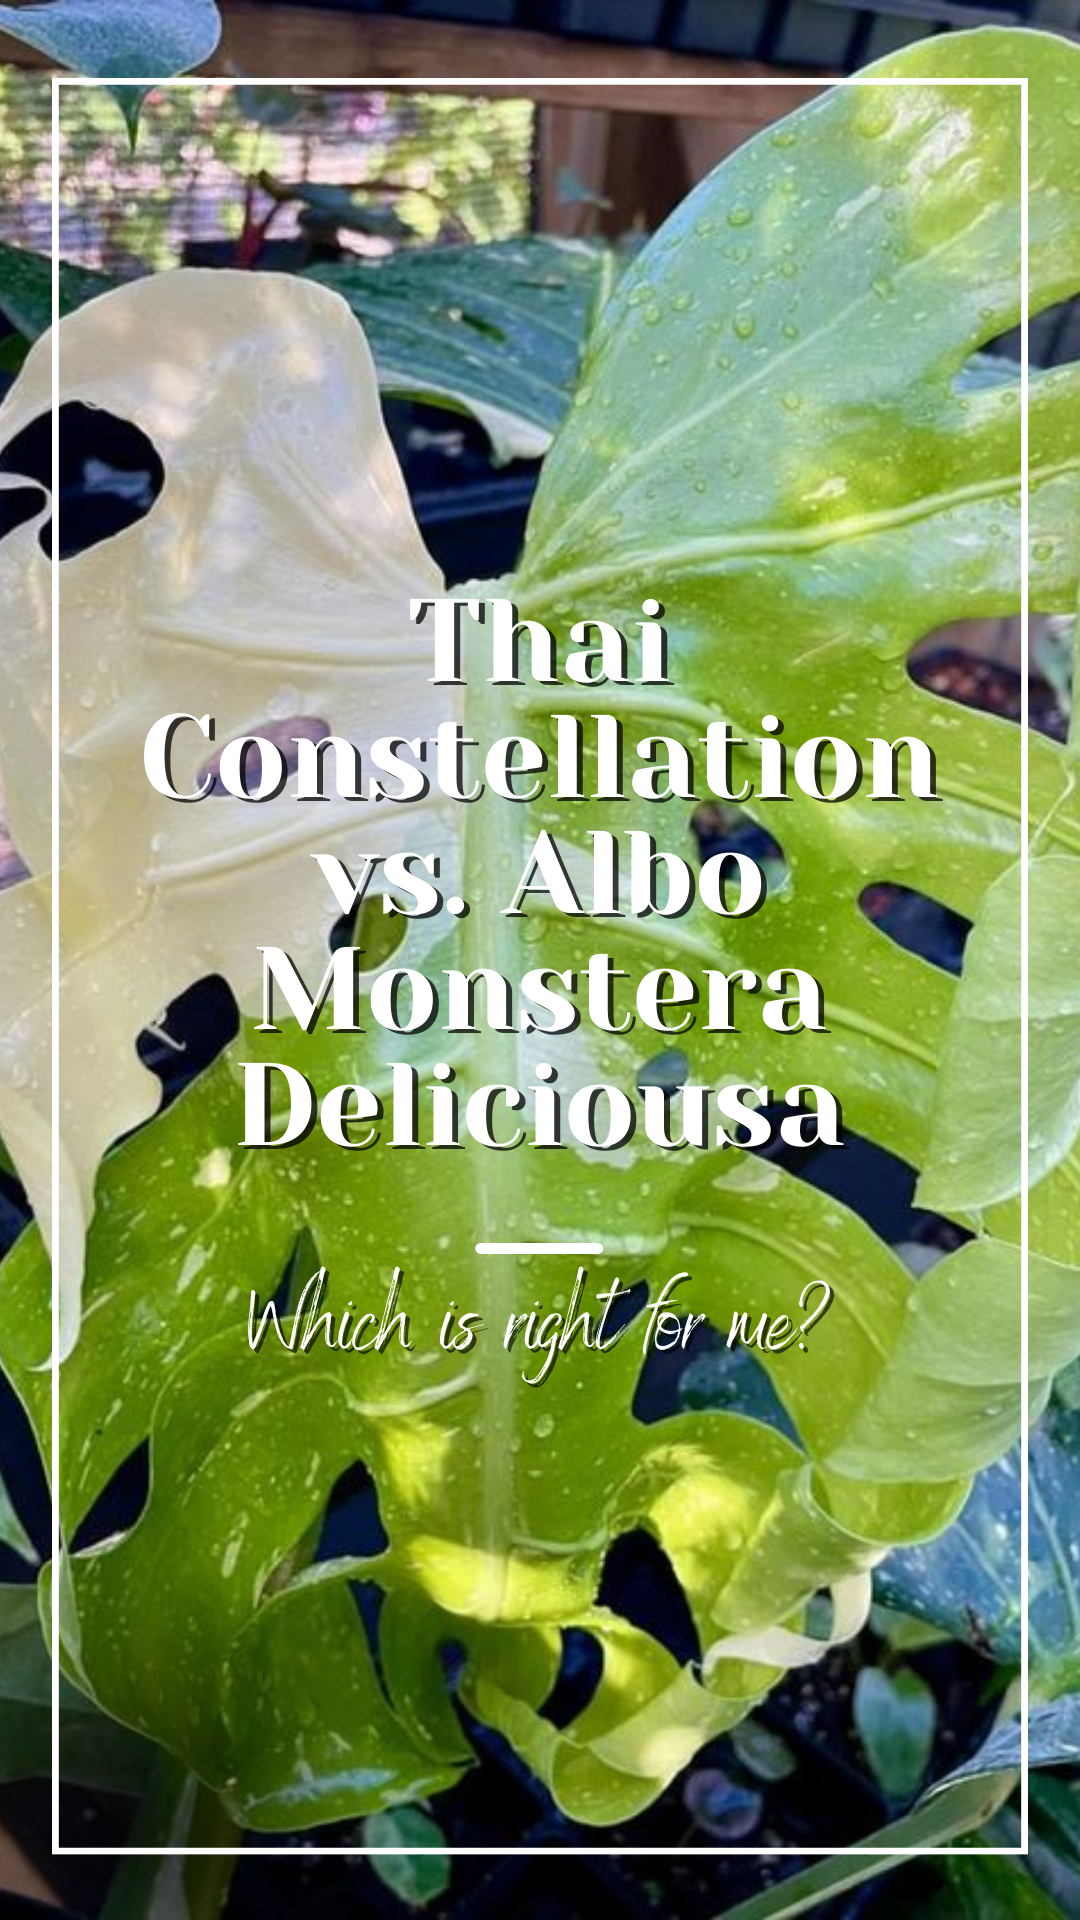 Thai Constellation or Albo: Which Variety of Monstera Deliciousa is right for me?